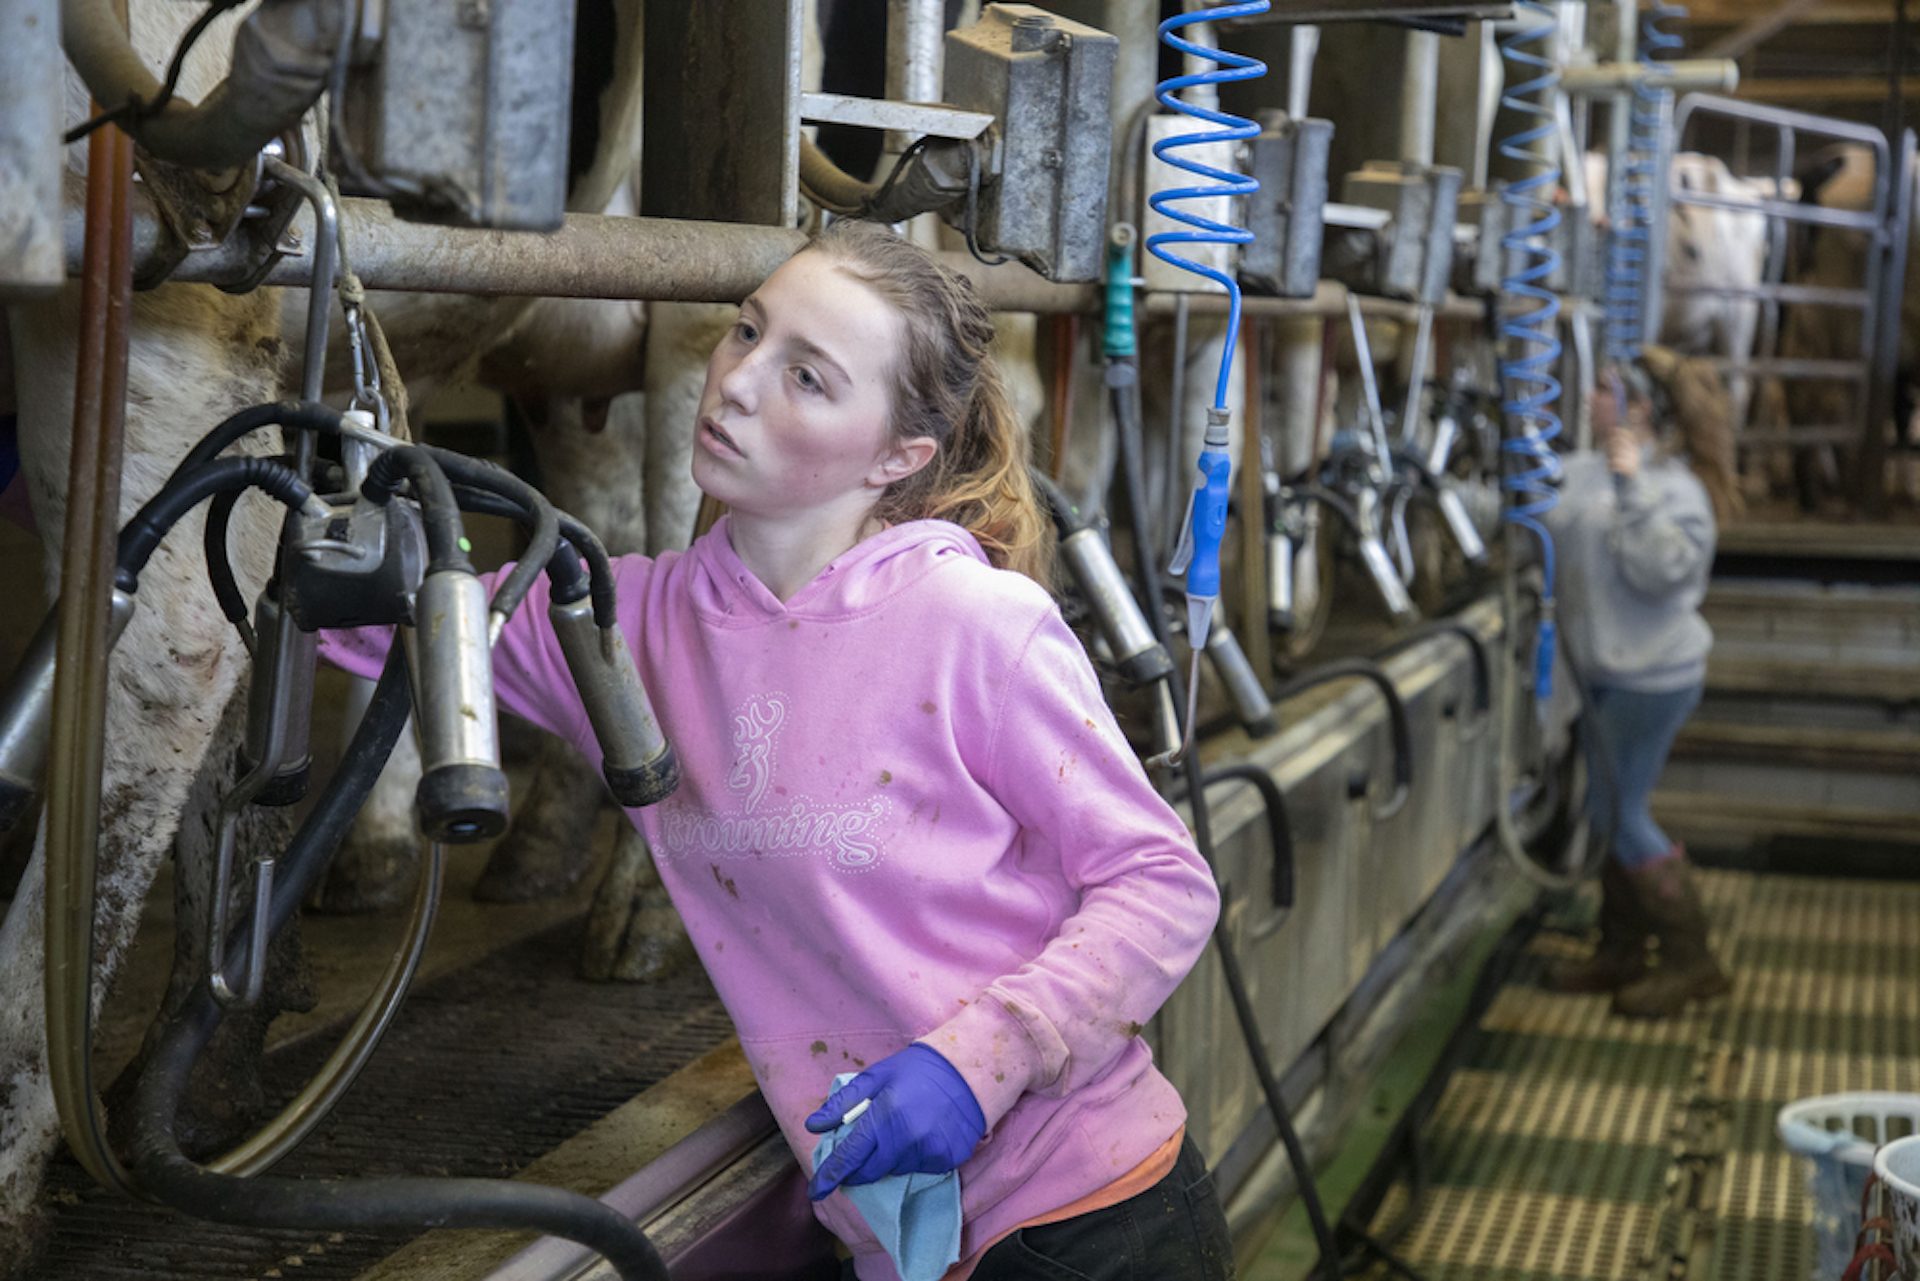 Marrimart Farms workers Kiana Stauffer, left, and Summer Bloom attach milking machines to 260 Holstein cows three times a day on the Loysville, Pa., farm, Apr. 11, 2020.